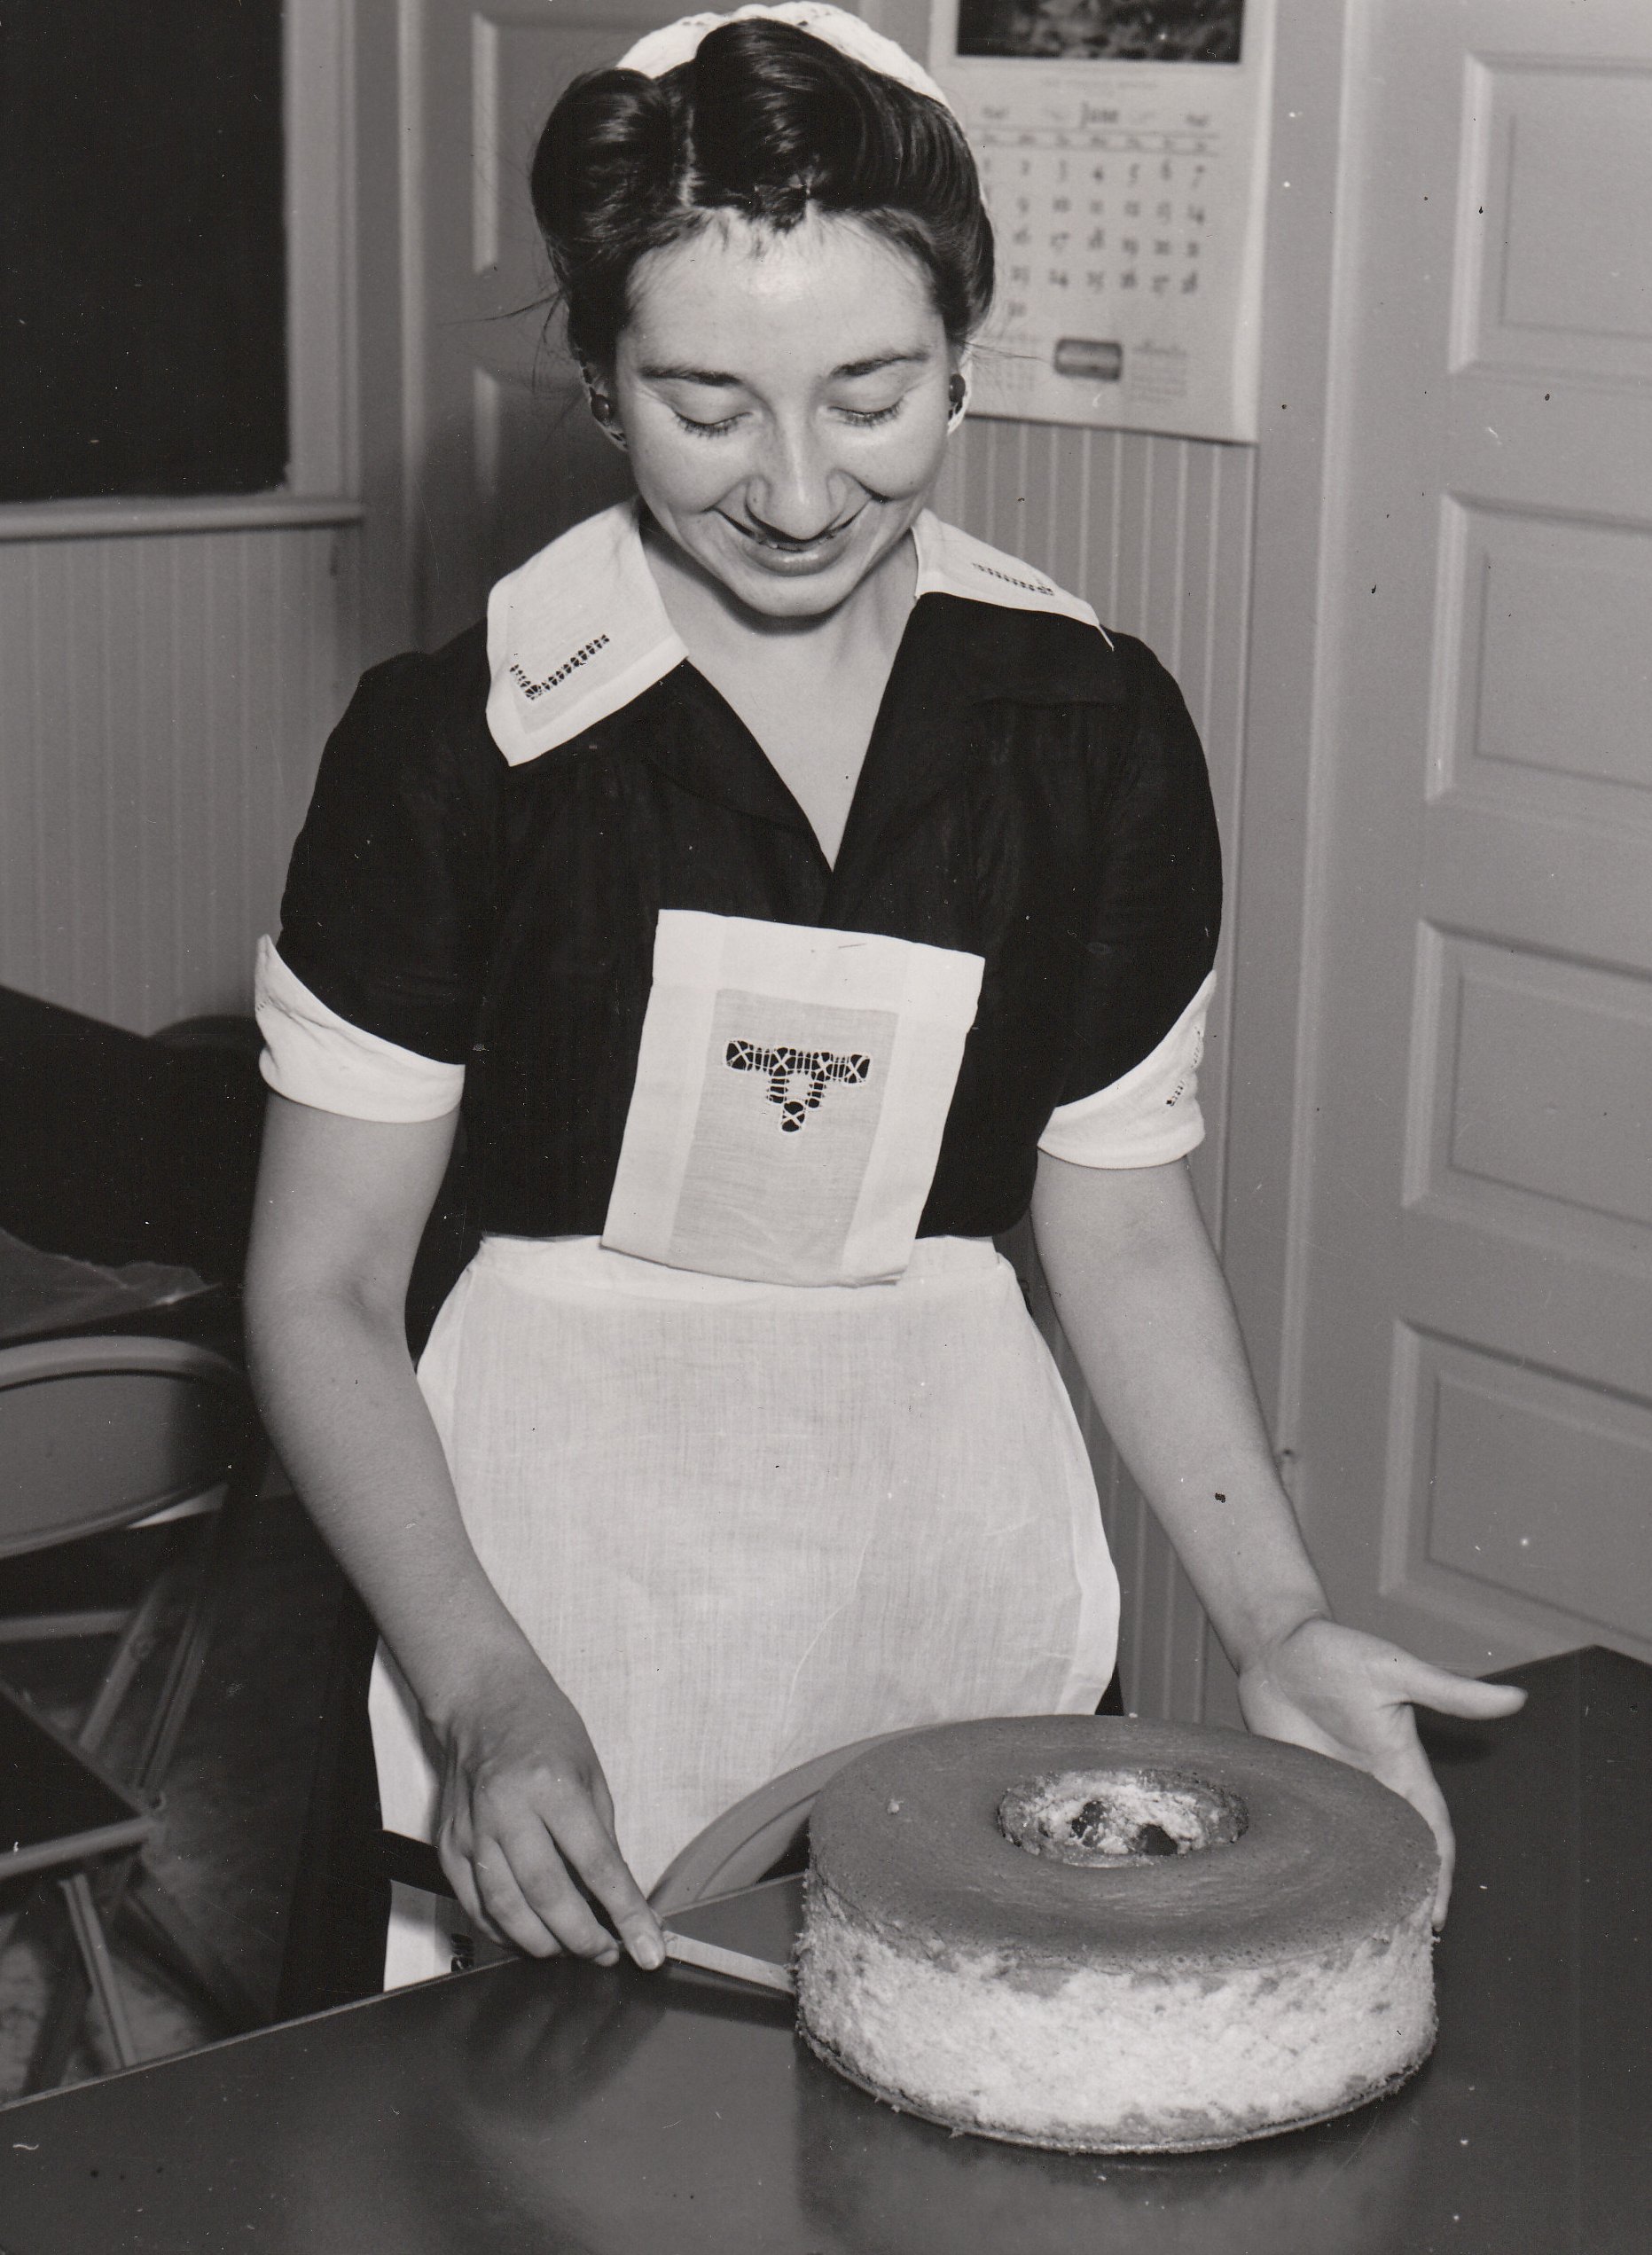 Binnie Mitchell, an NYA student worker at Pasadena Junior College (California), seems quite satisfied with her tempting creation. Photo courtesy of the National Archives (ca. 1935-1943).